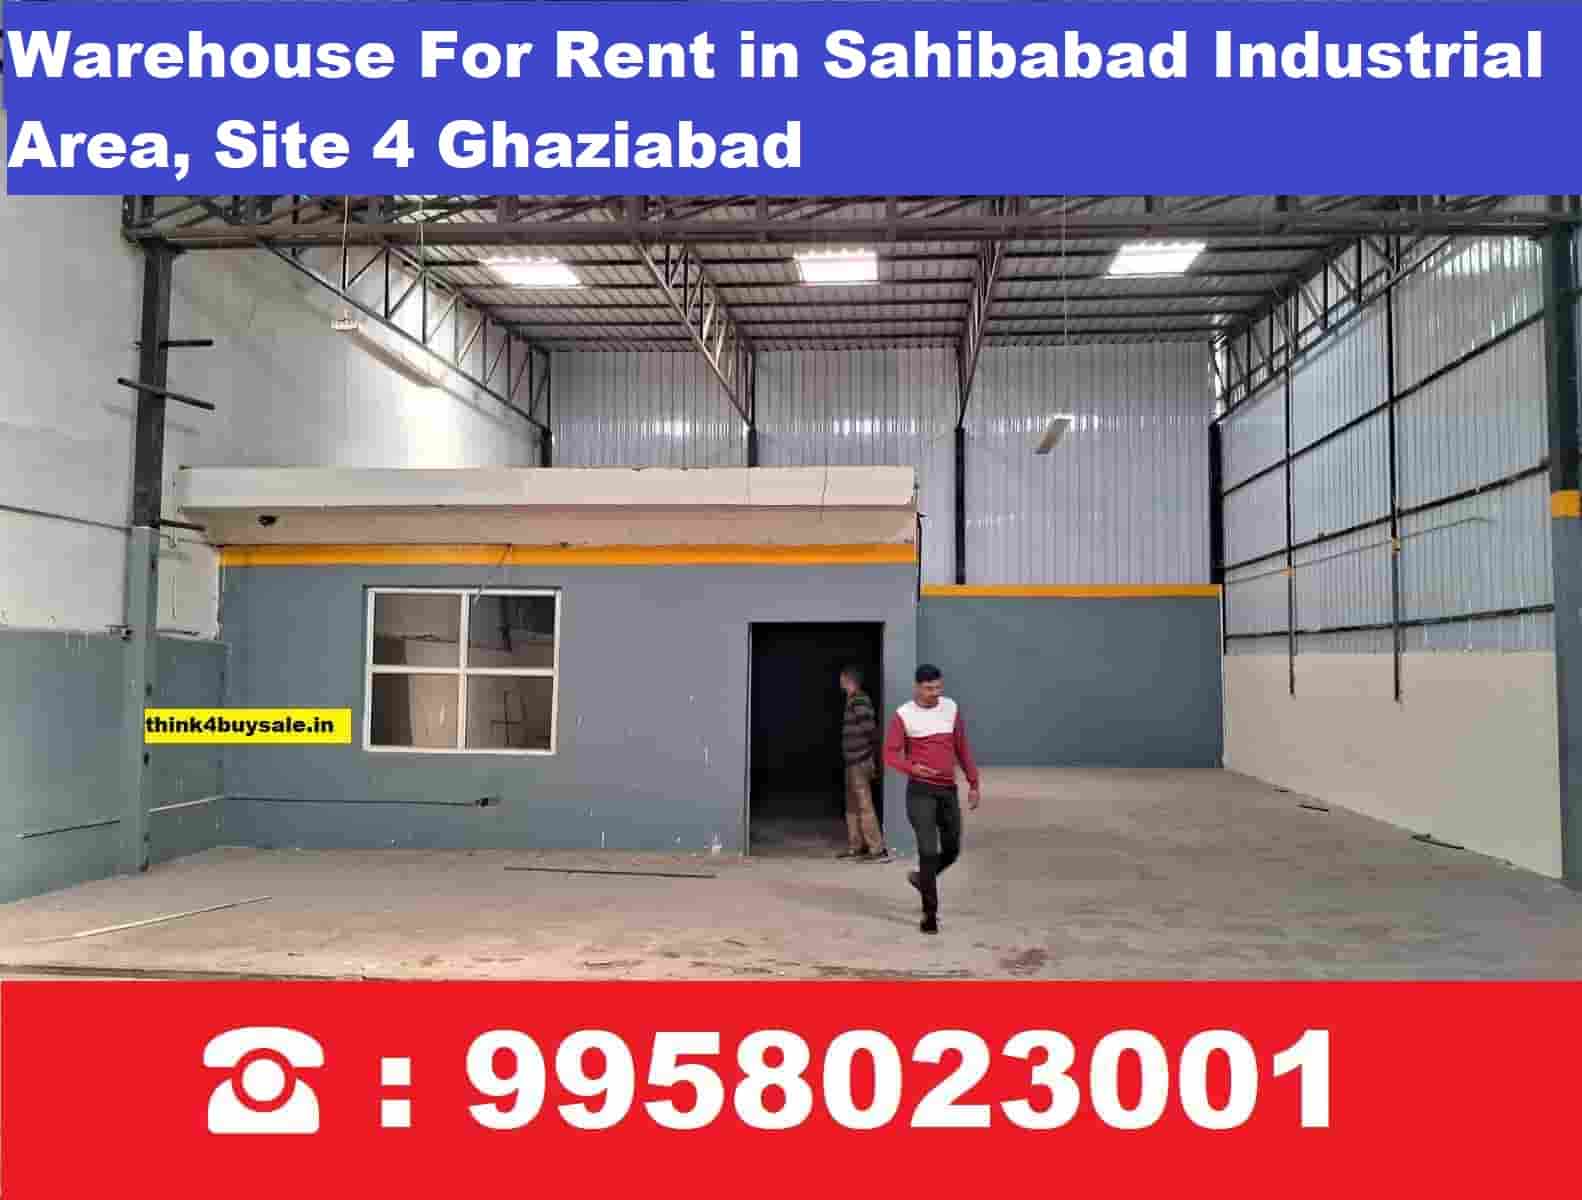 warehouse for rent in sahibabad industrial area